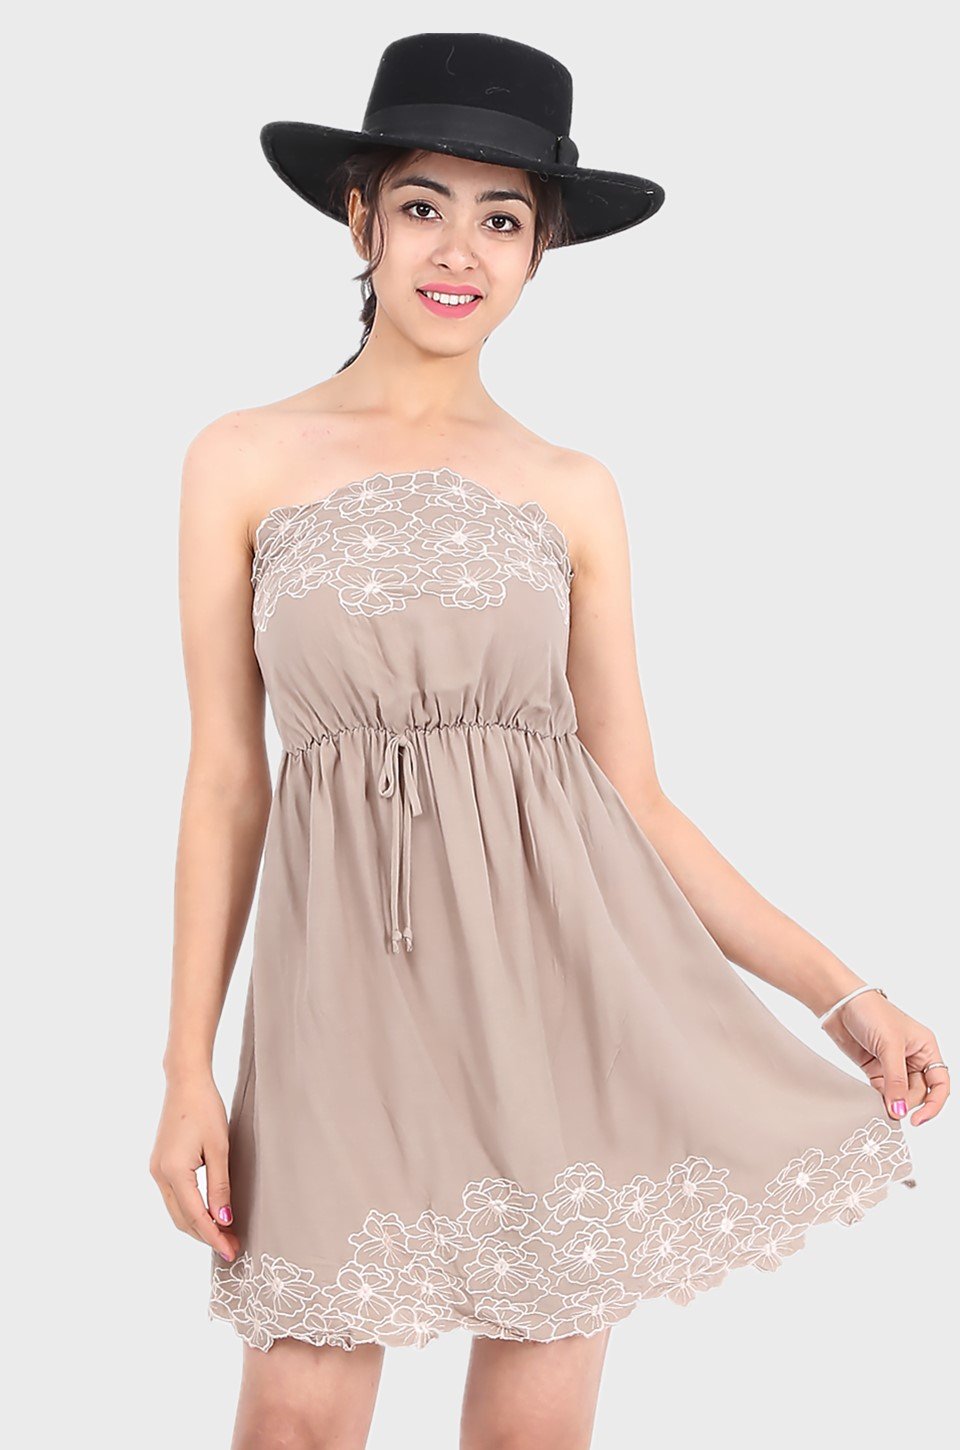 MISS PINKI Aria Embroidery dress in beige